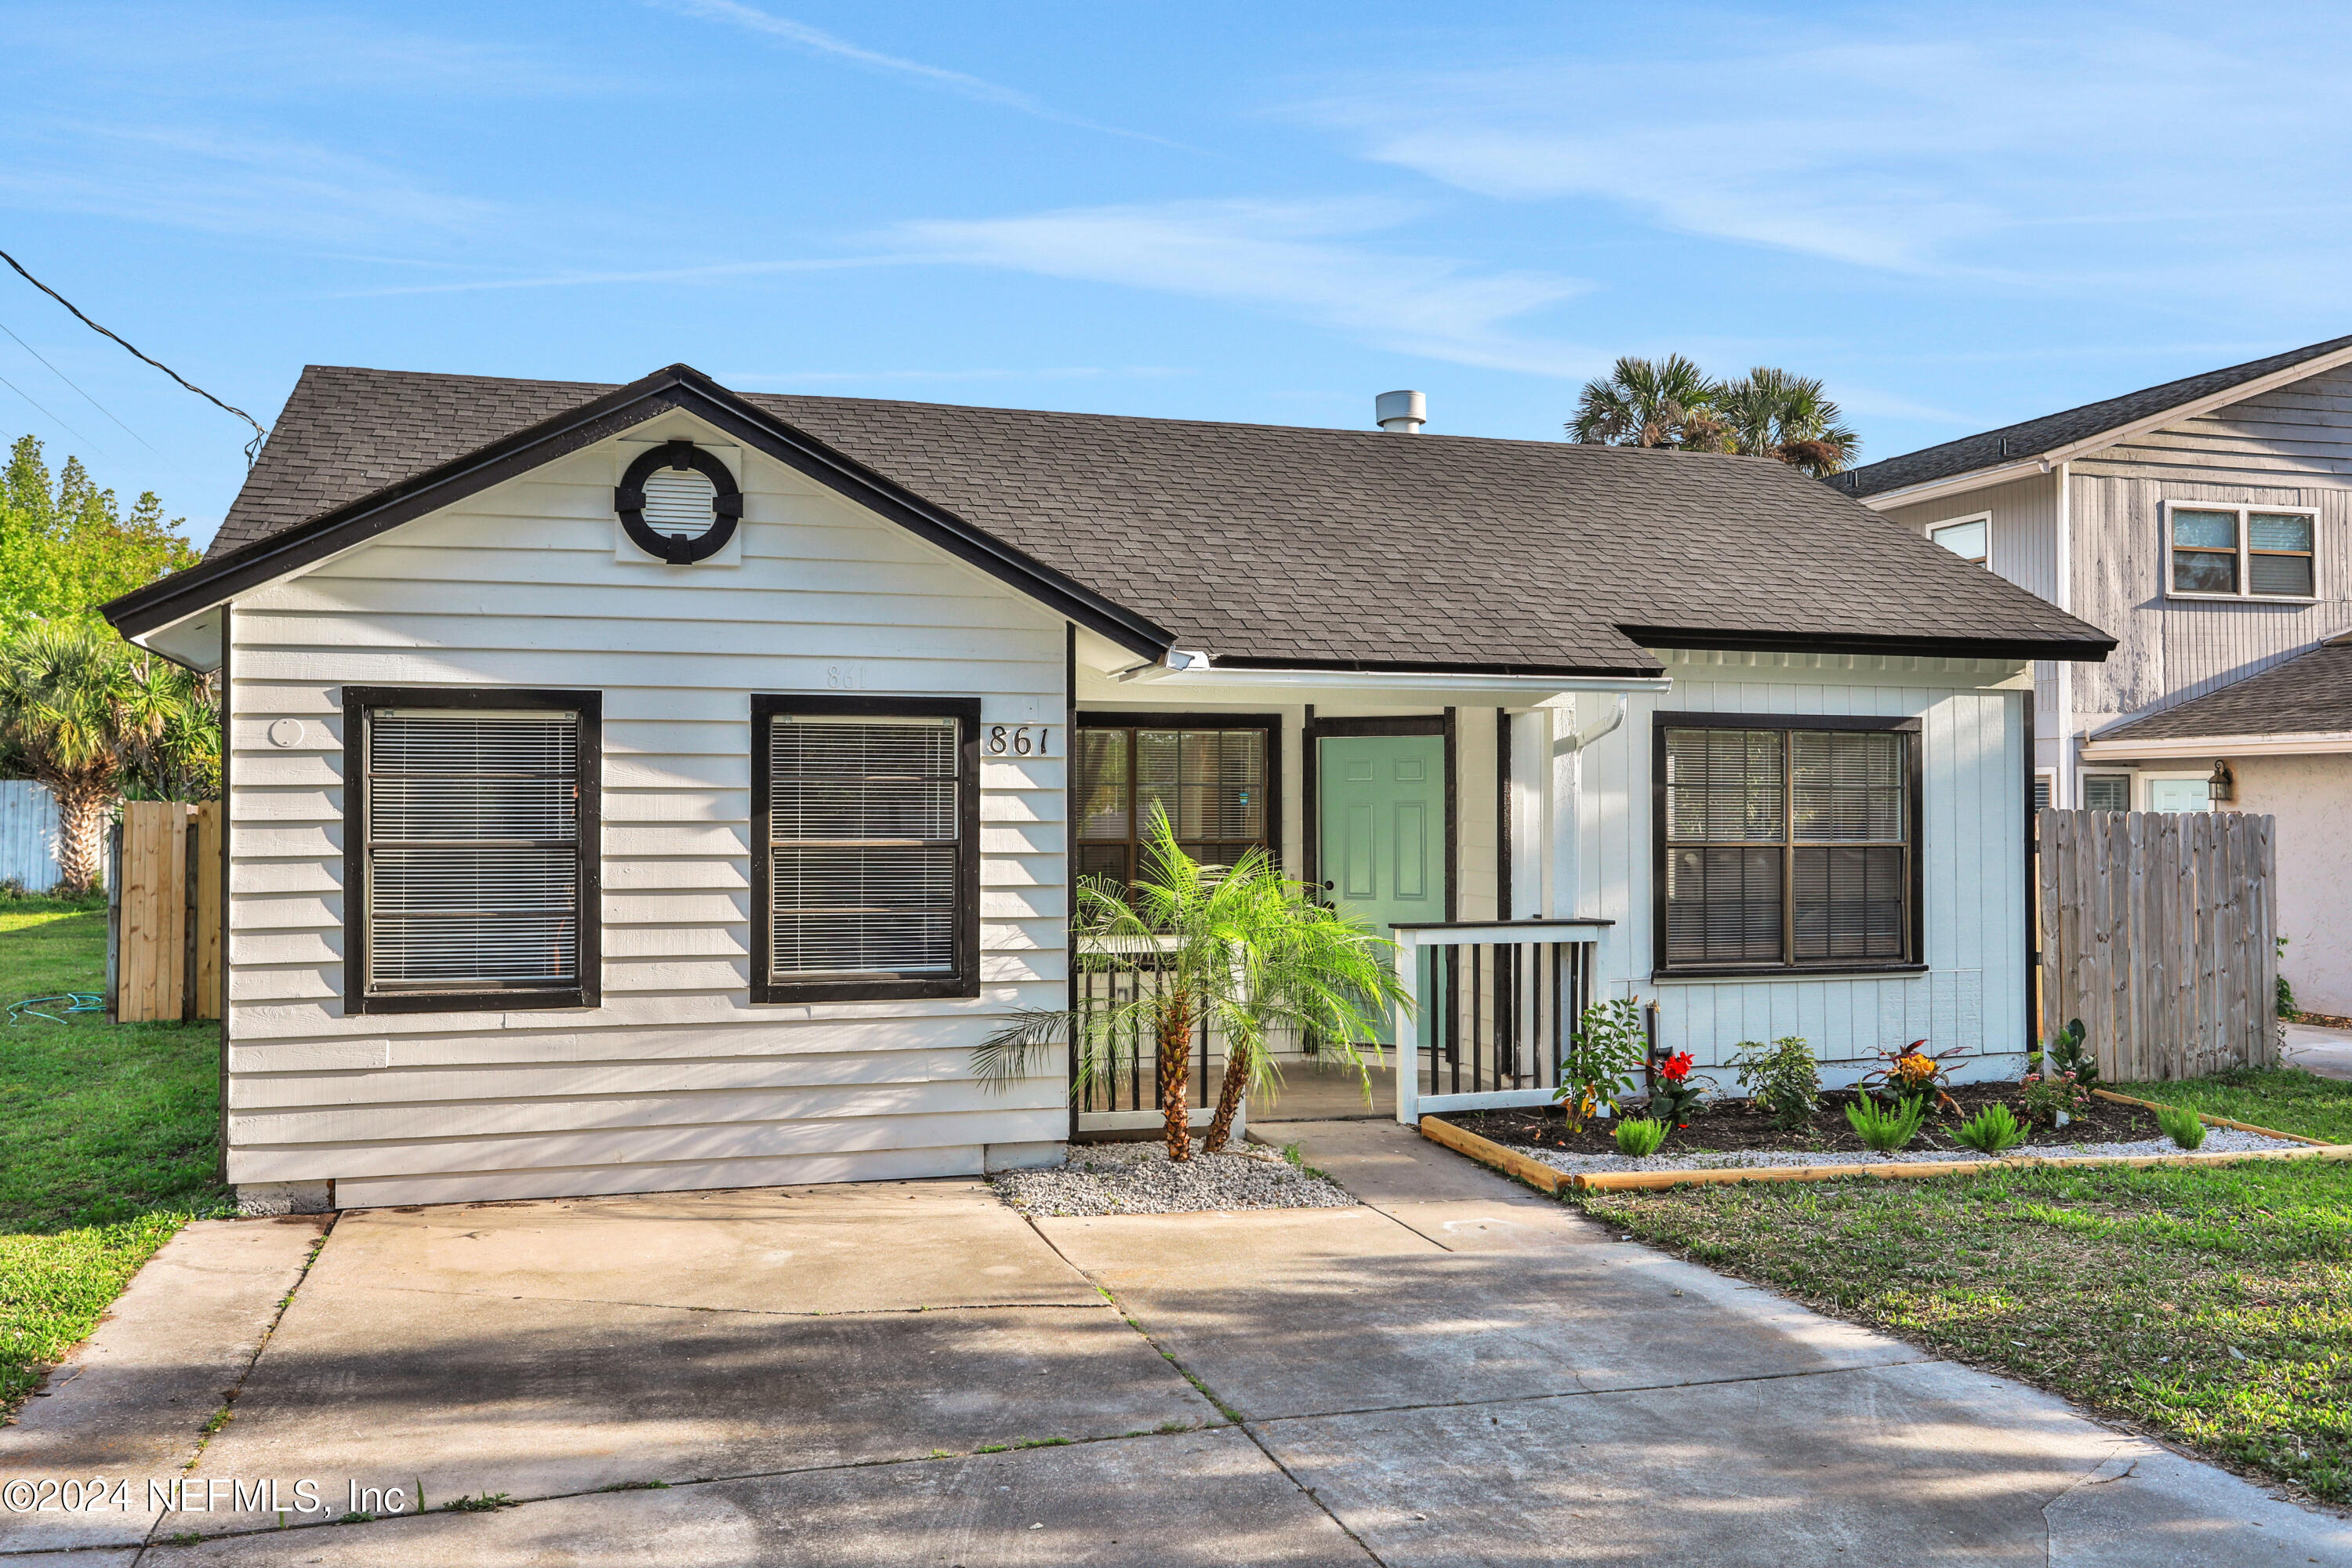 Jacksonville Beach, FL home for sale located at 861 12th Avenue S, Jacksonville Beach, FL 32250